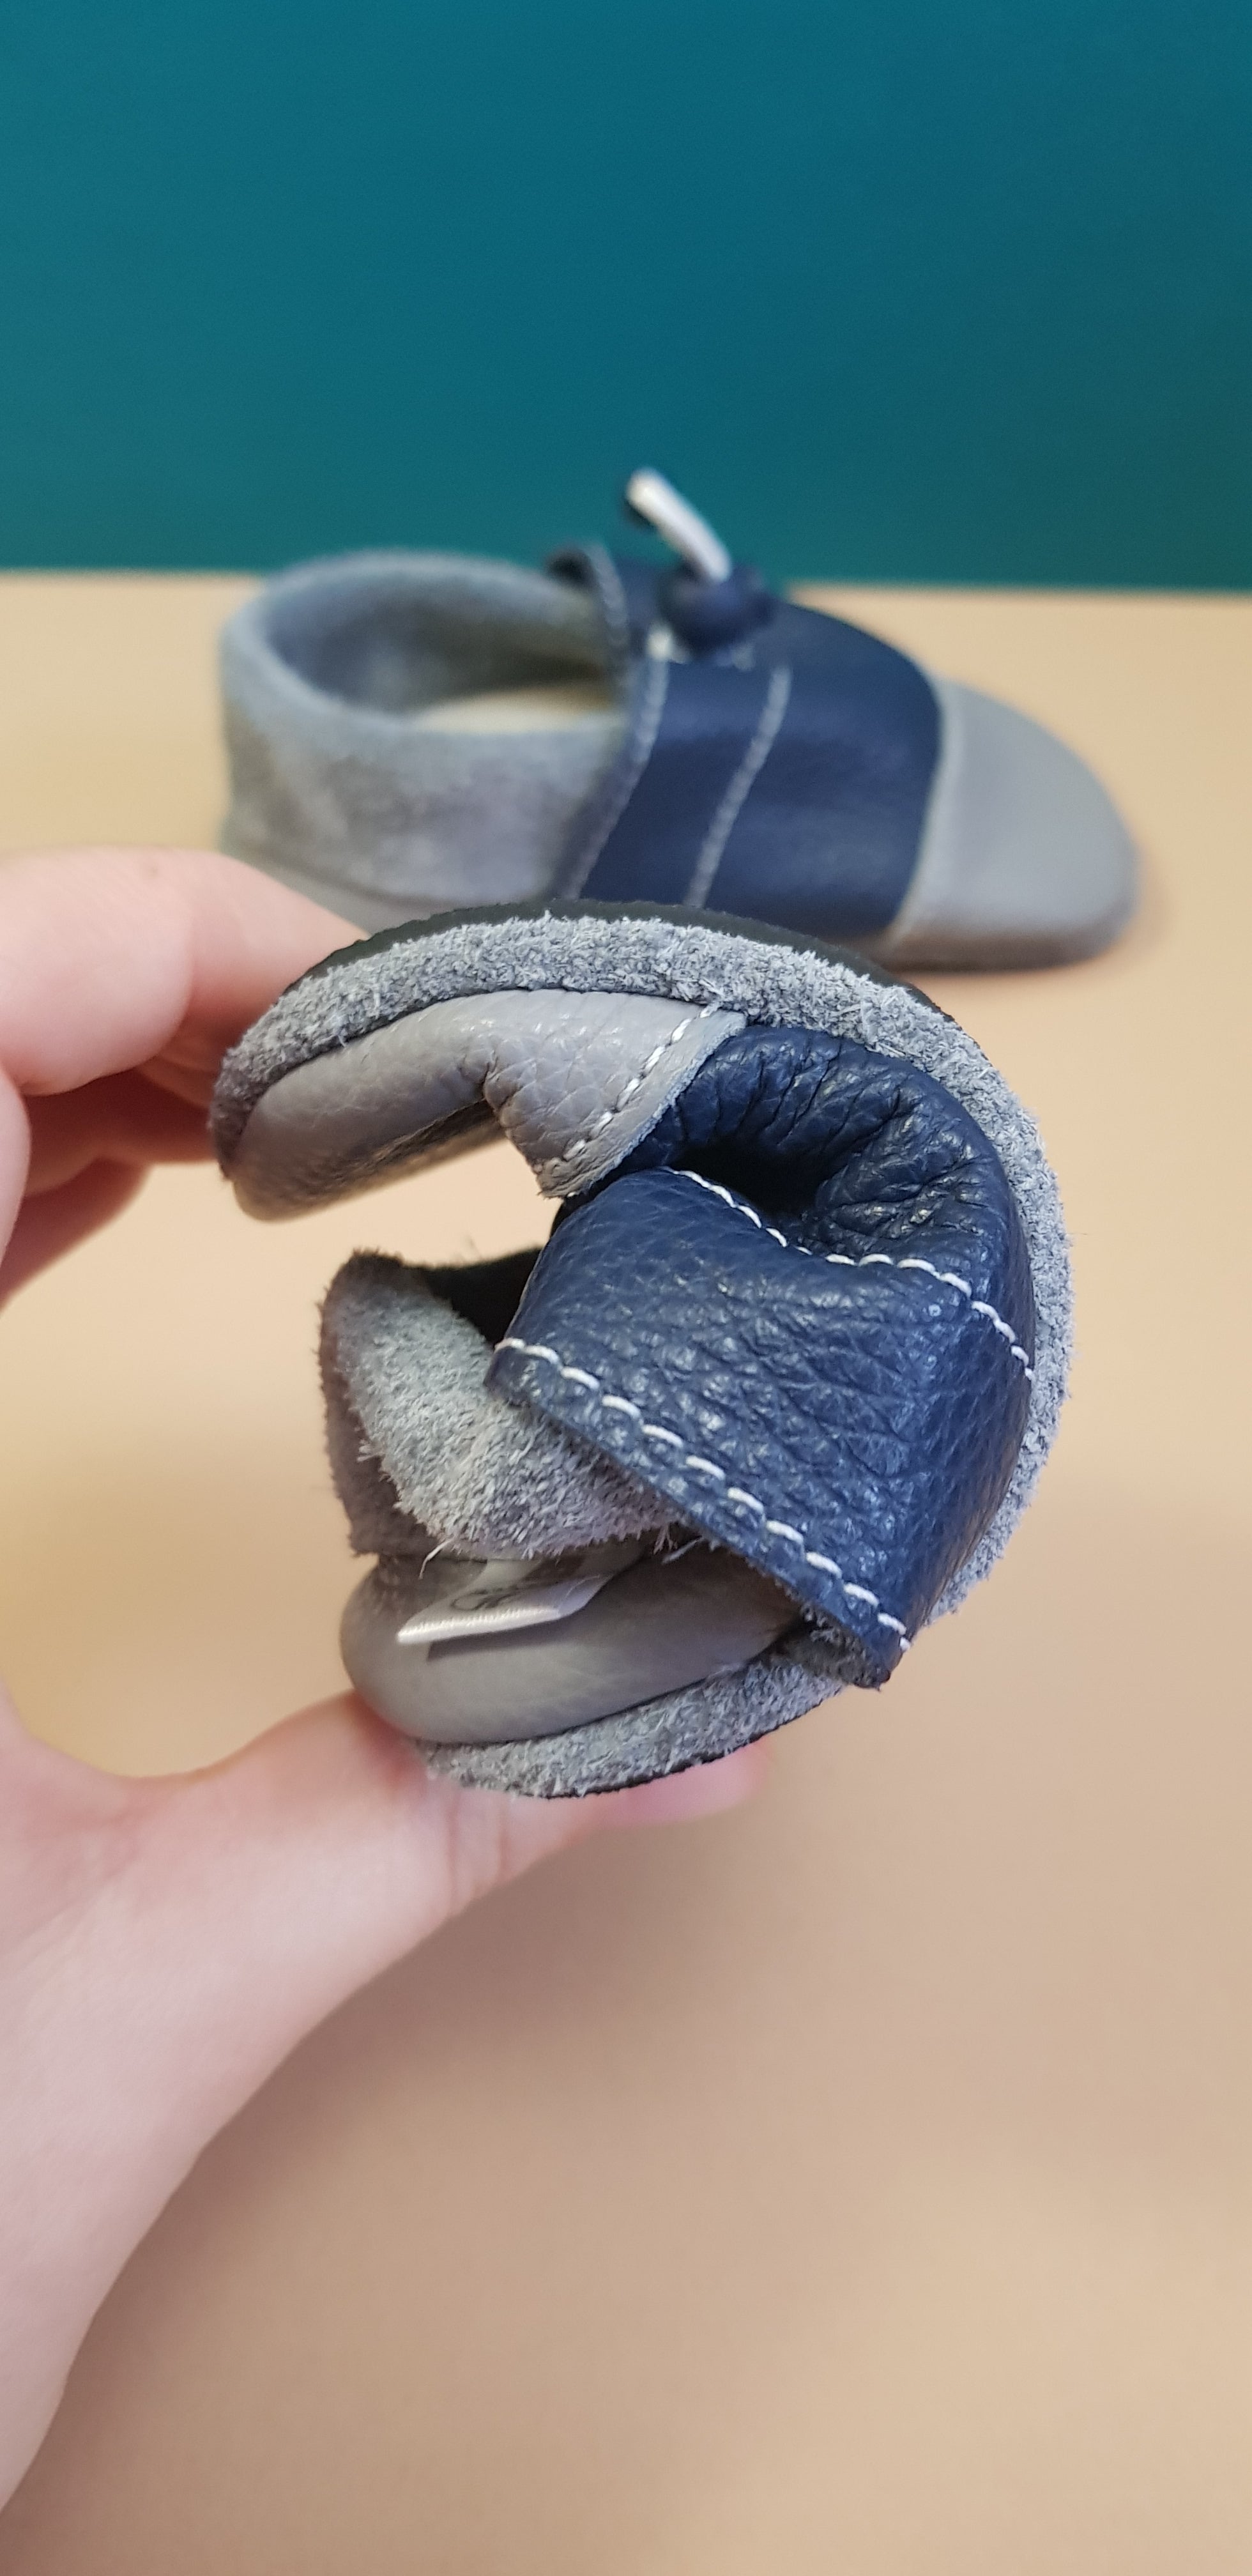 Bendable Navy and Grey Nohatka soft sole booties/slippers for babies and toddler, anatomically shaped from soft leather with adjustable ankle fastening and anti slip indoor/outdoor sole